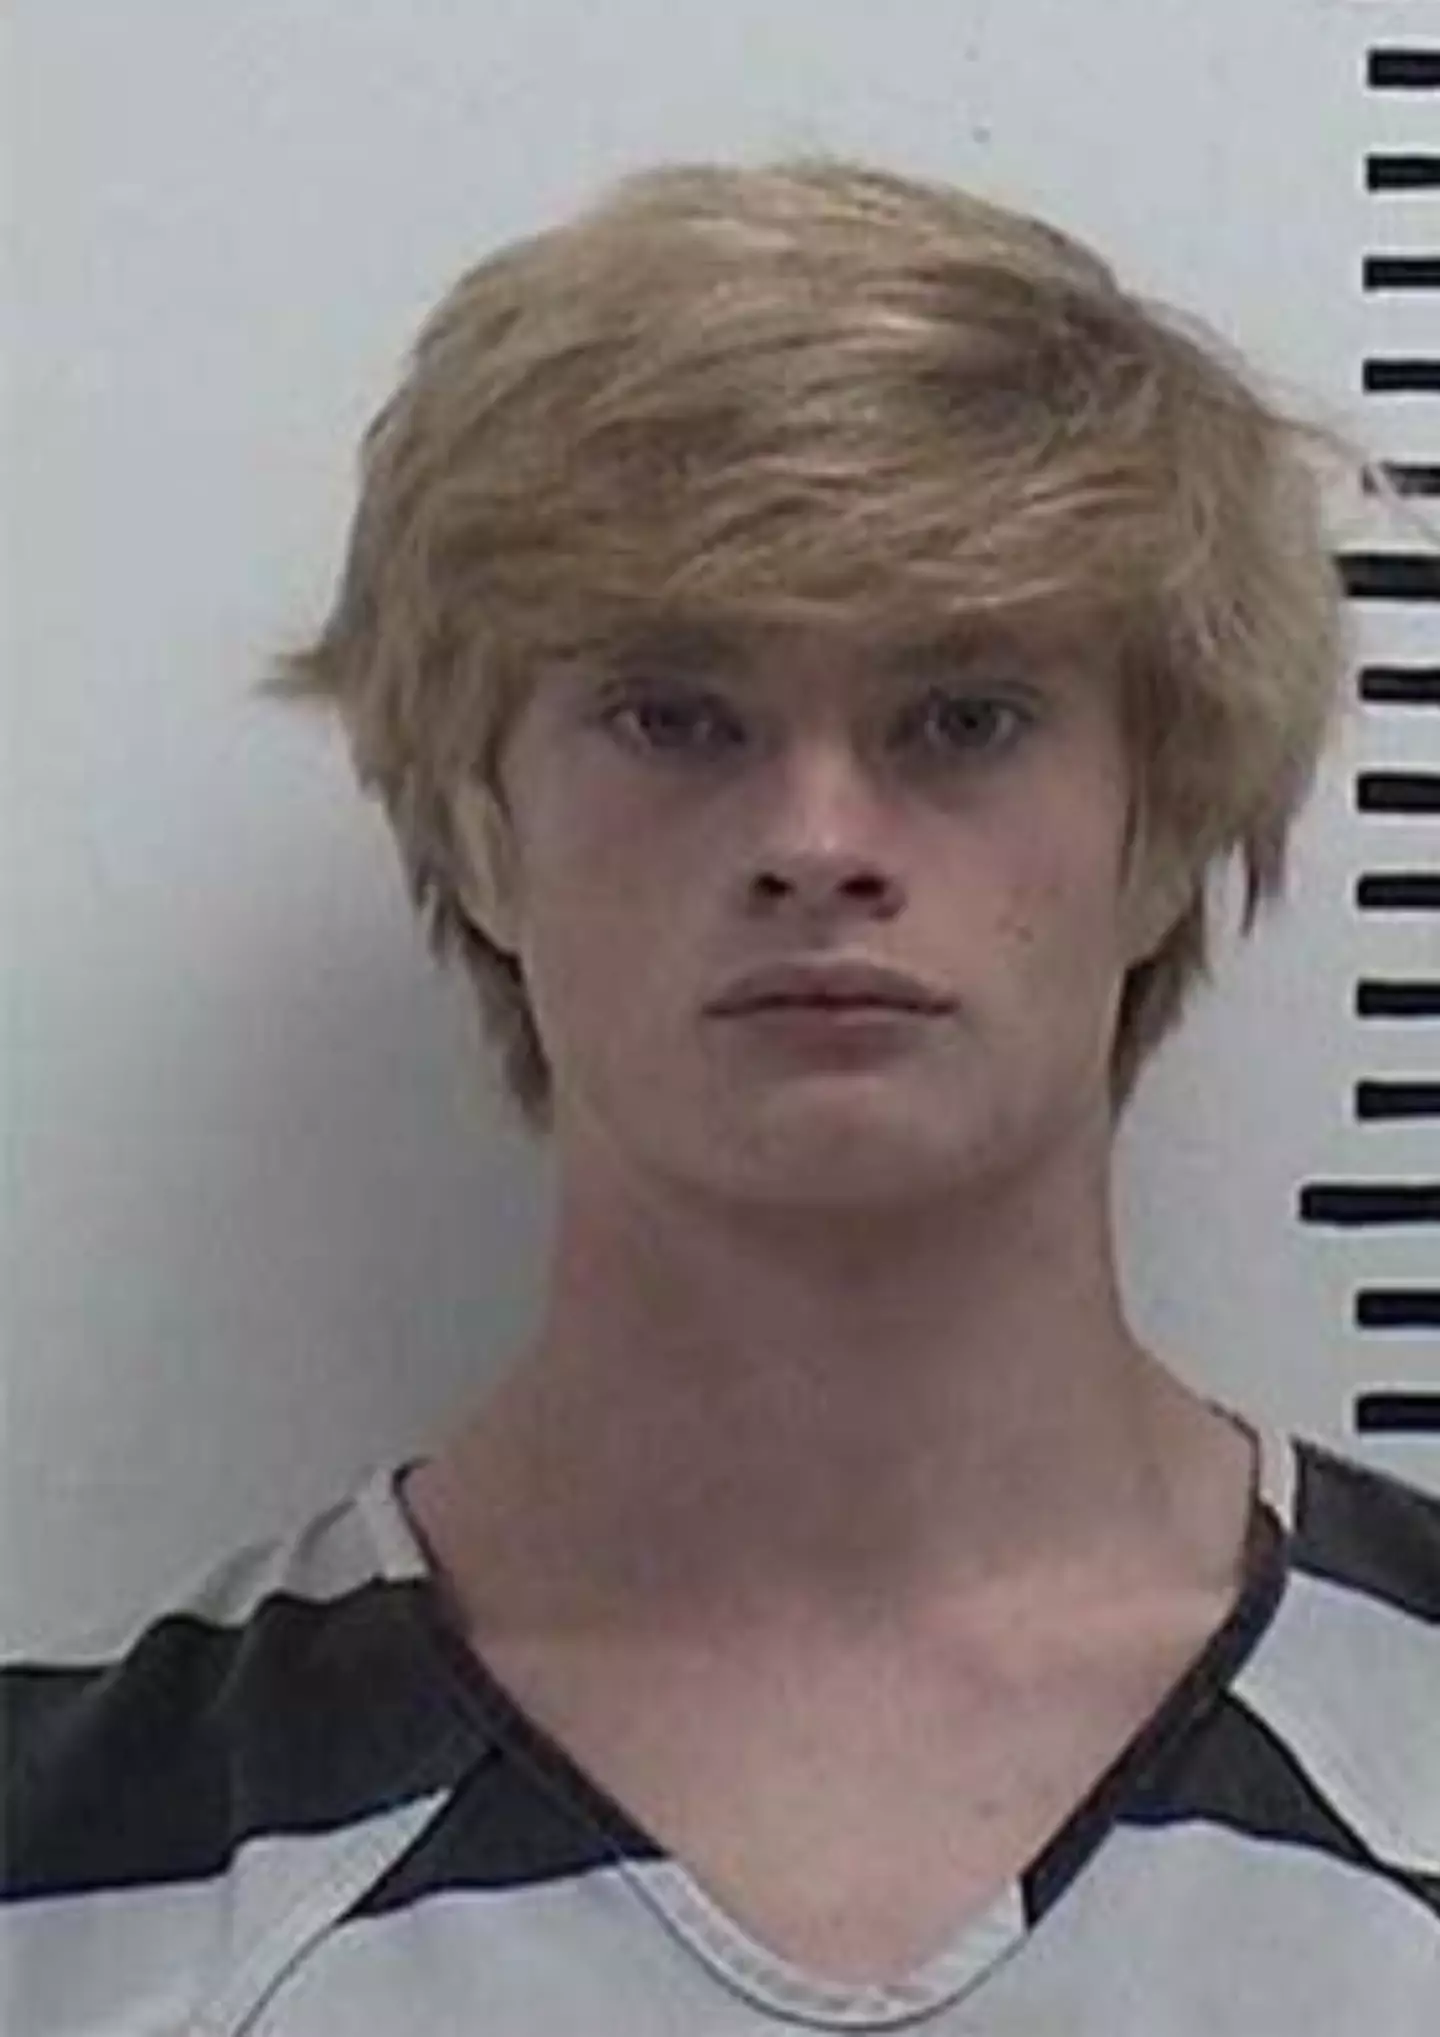 Jeremy Goodale is one of two teens charged with the murder of Nohema Graber.